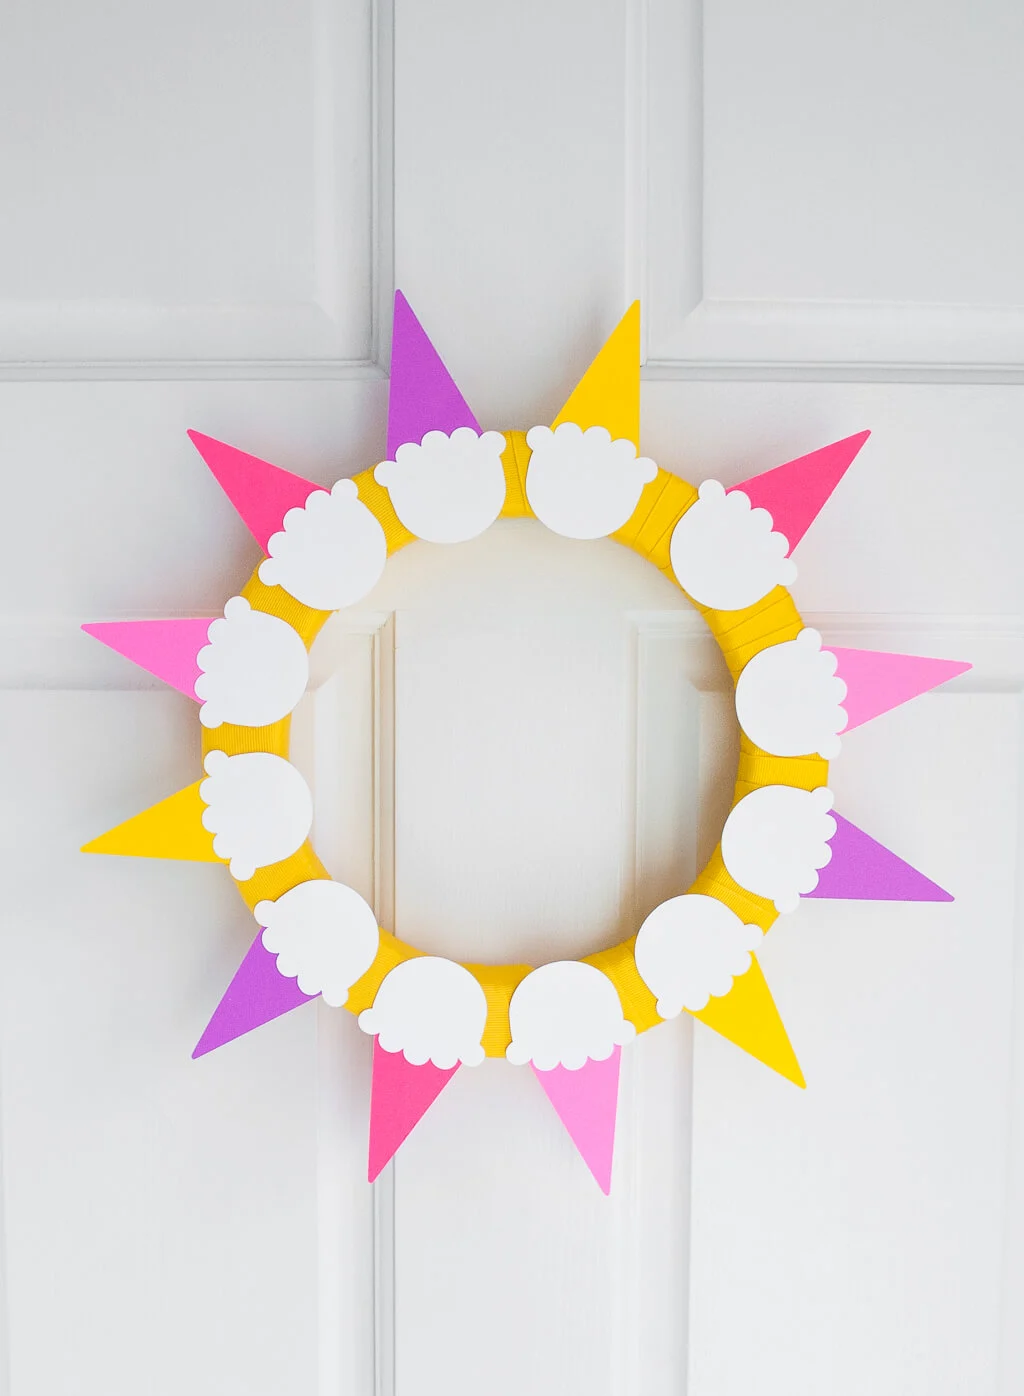 Easy DIY summer ice cream wreath that looks like rays of sunshine! Make it for your front door in less than one hour.